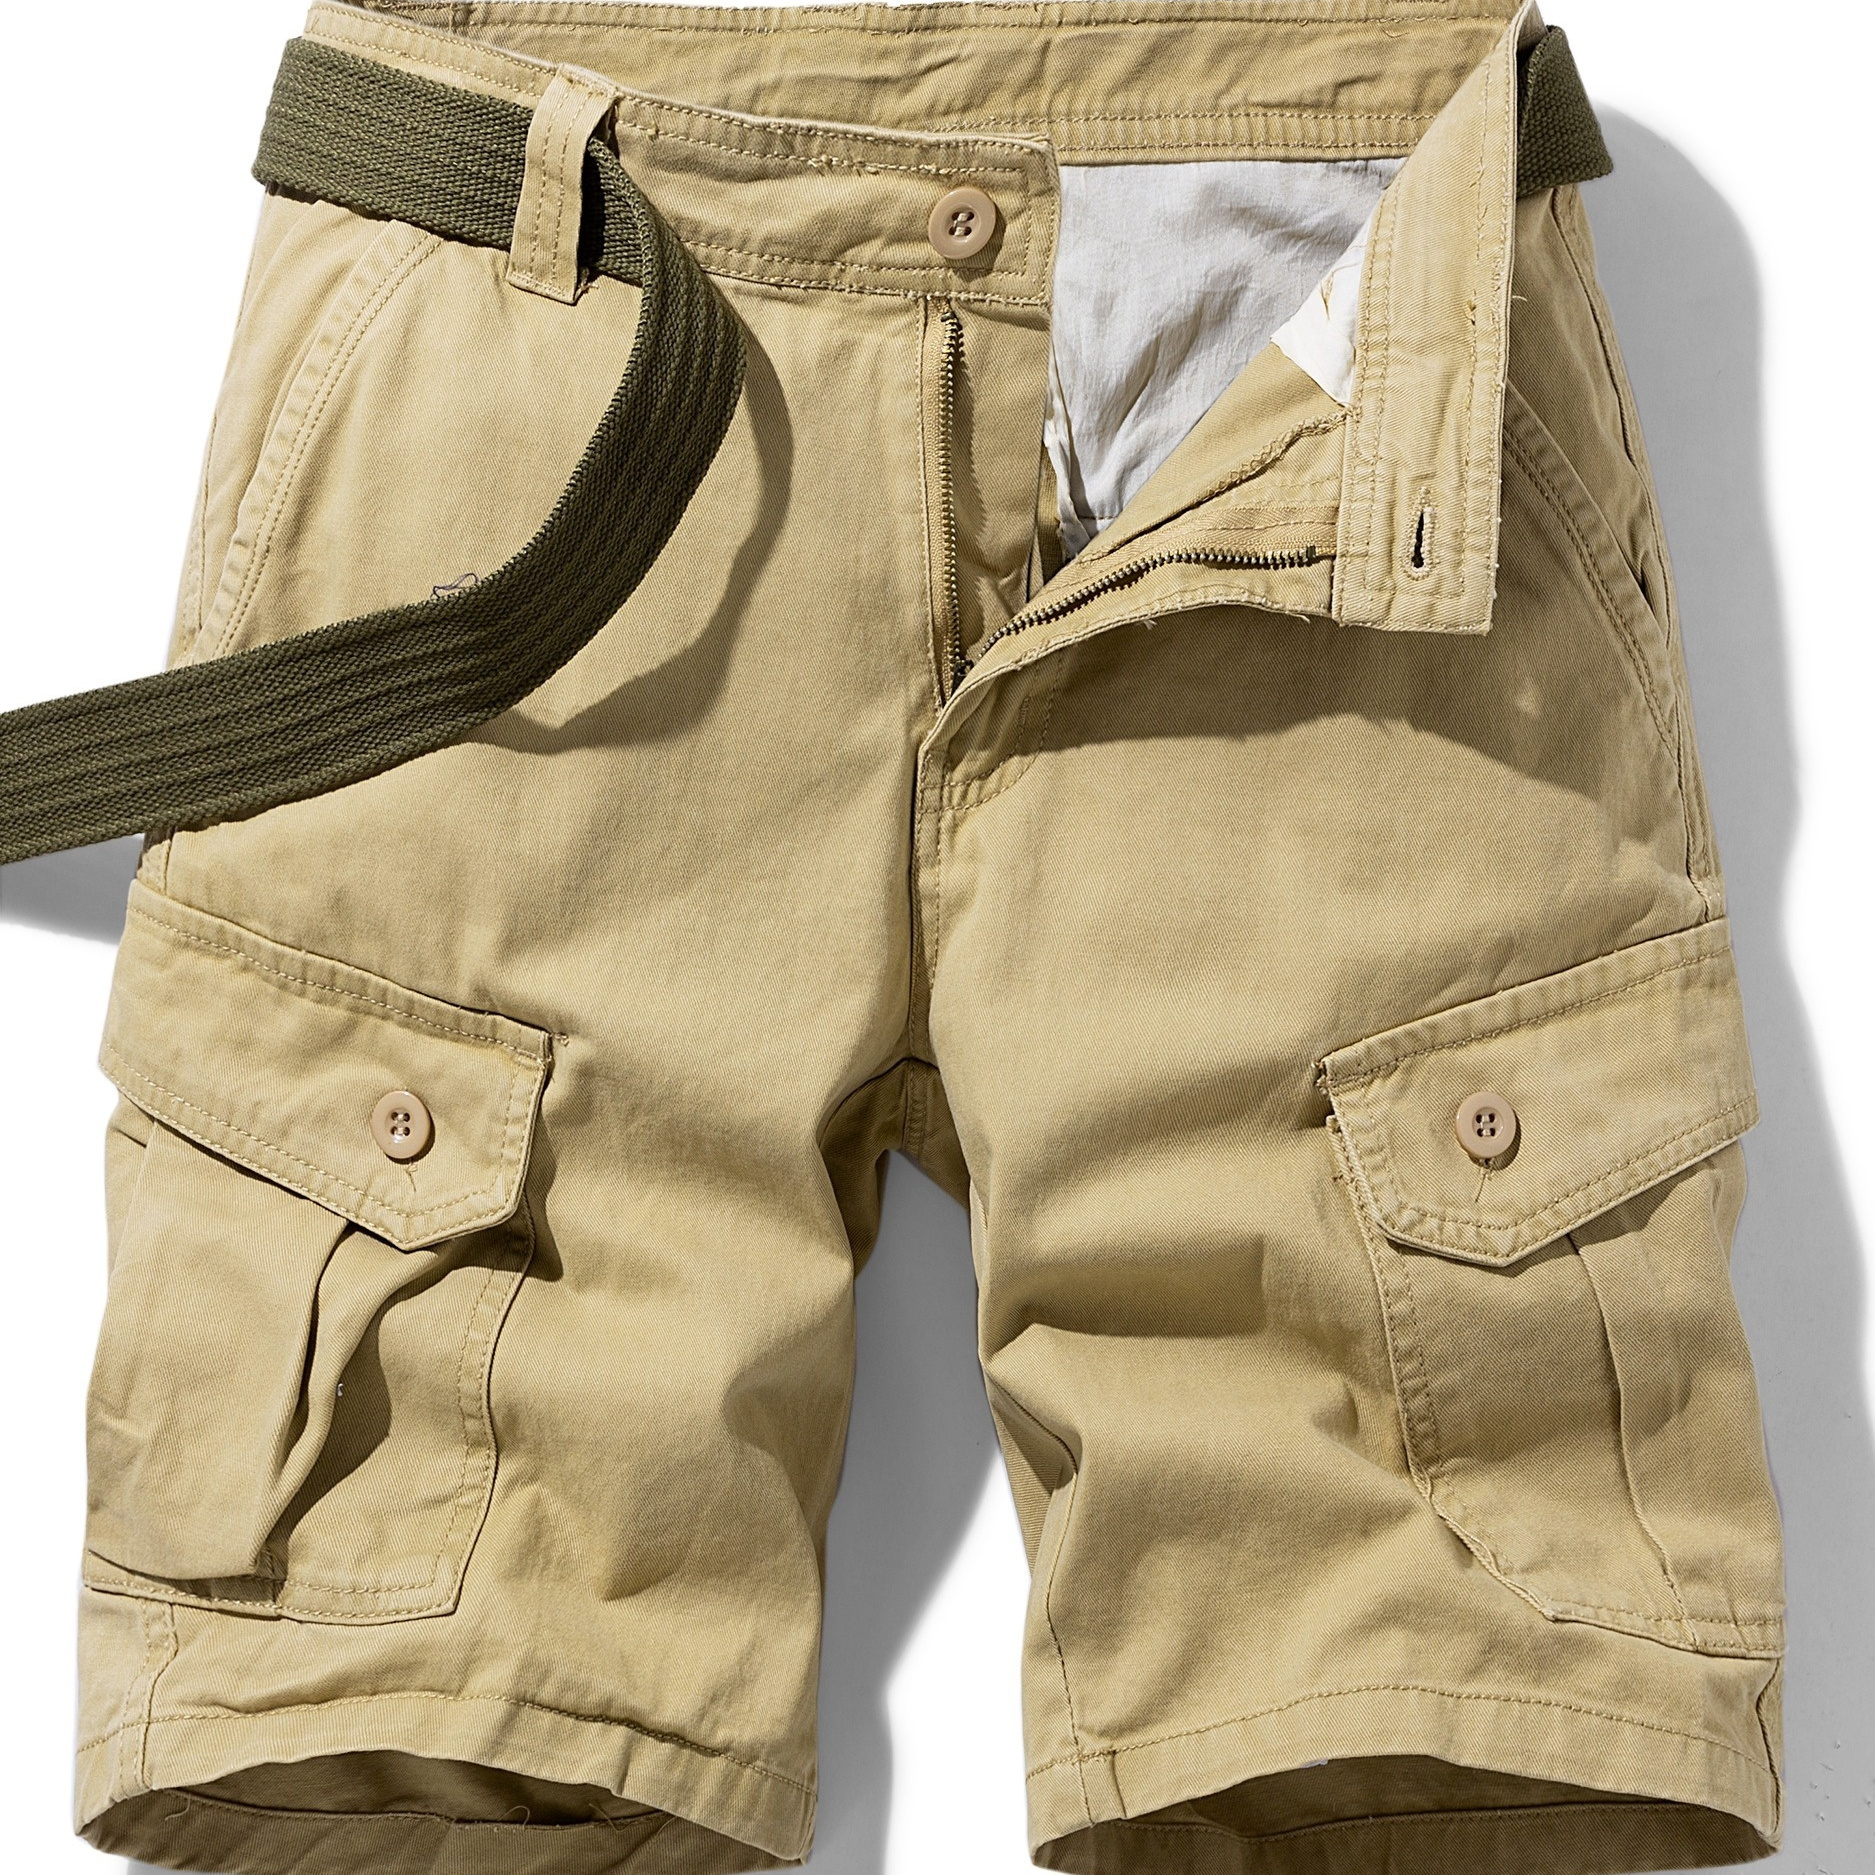 

Men's Casual Multi Pocket Cargo Shorts, Chic Comfy Cotton Shorts For Outdoor Hiking (without Belt)